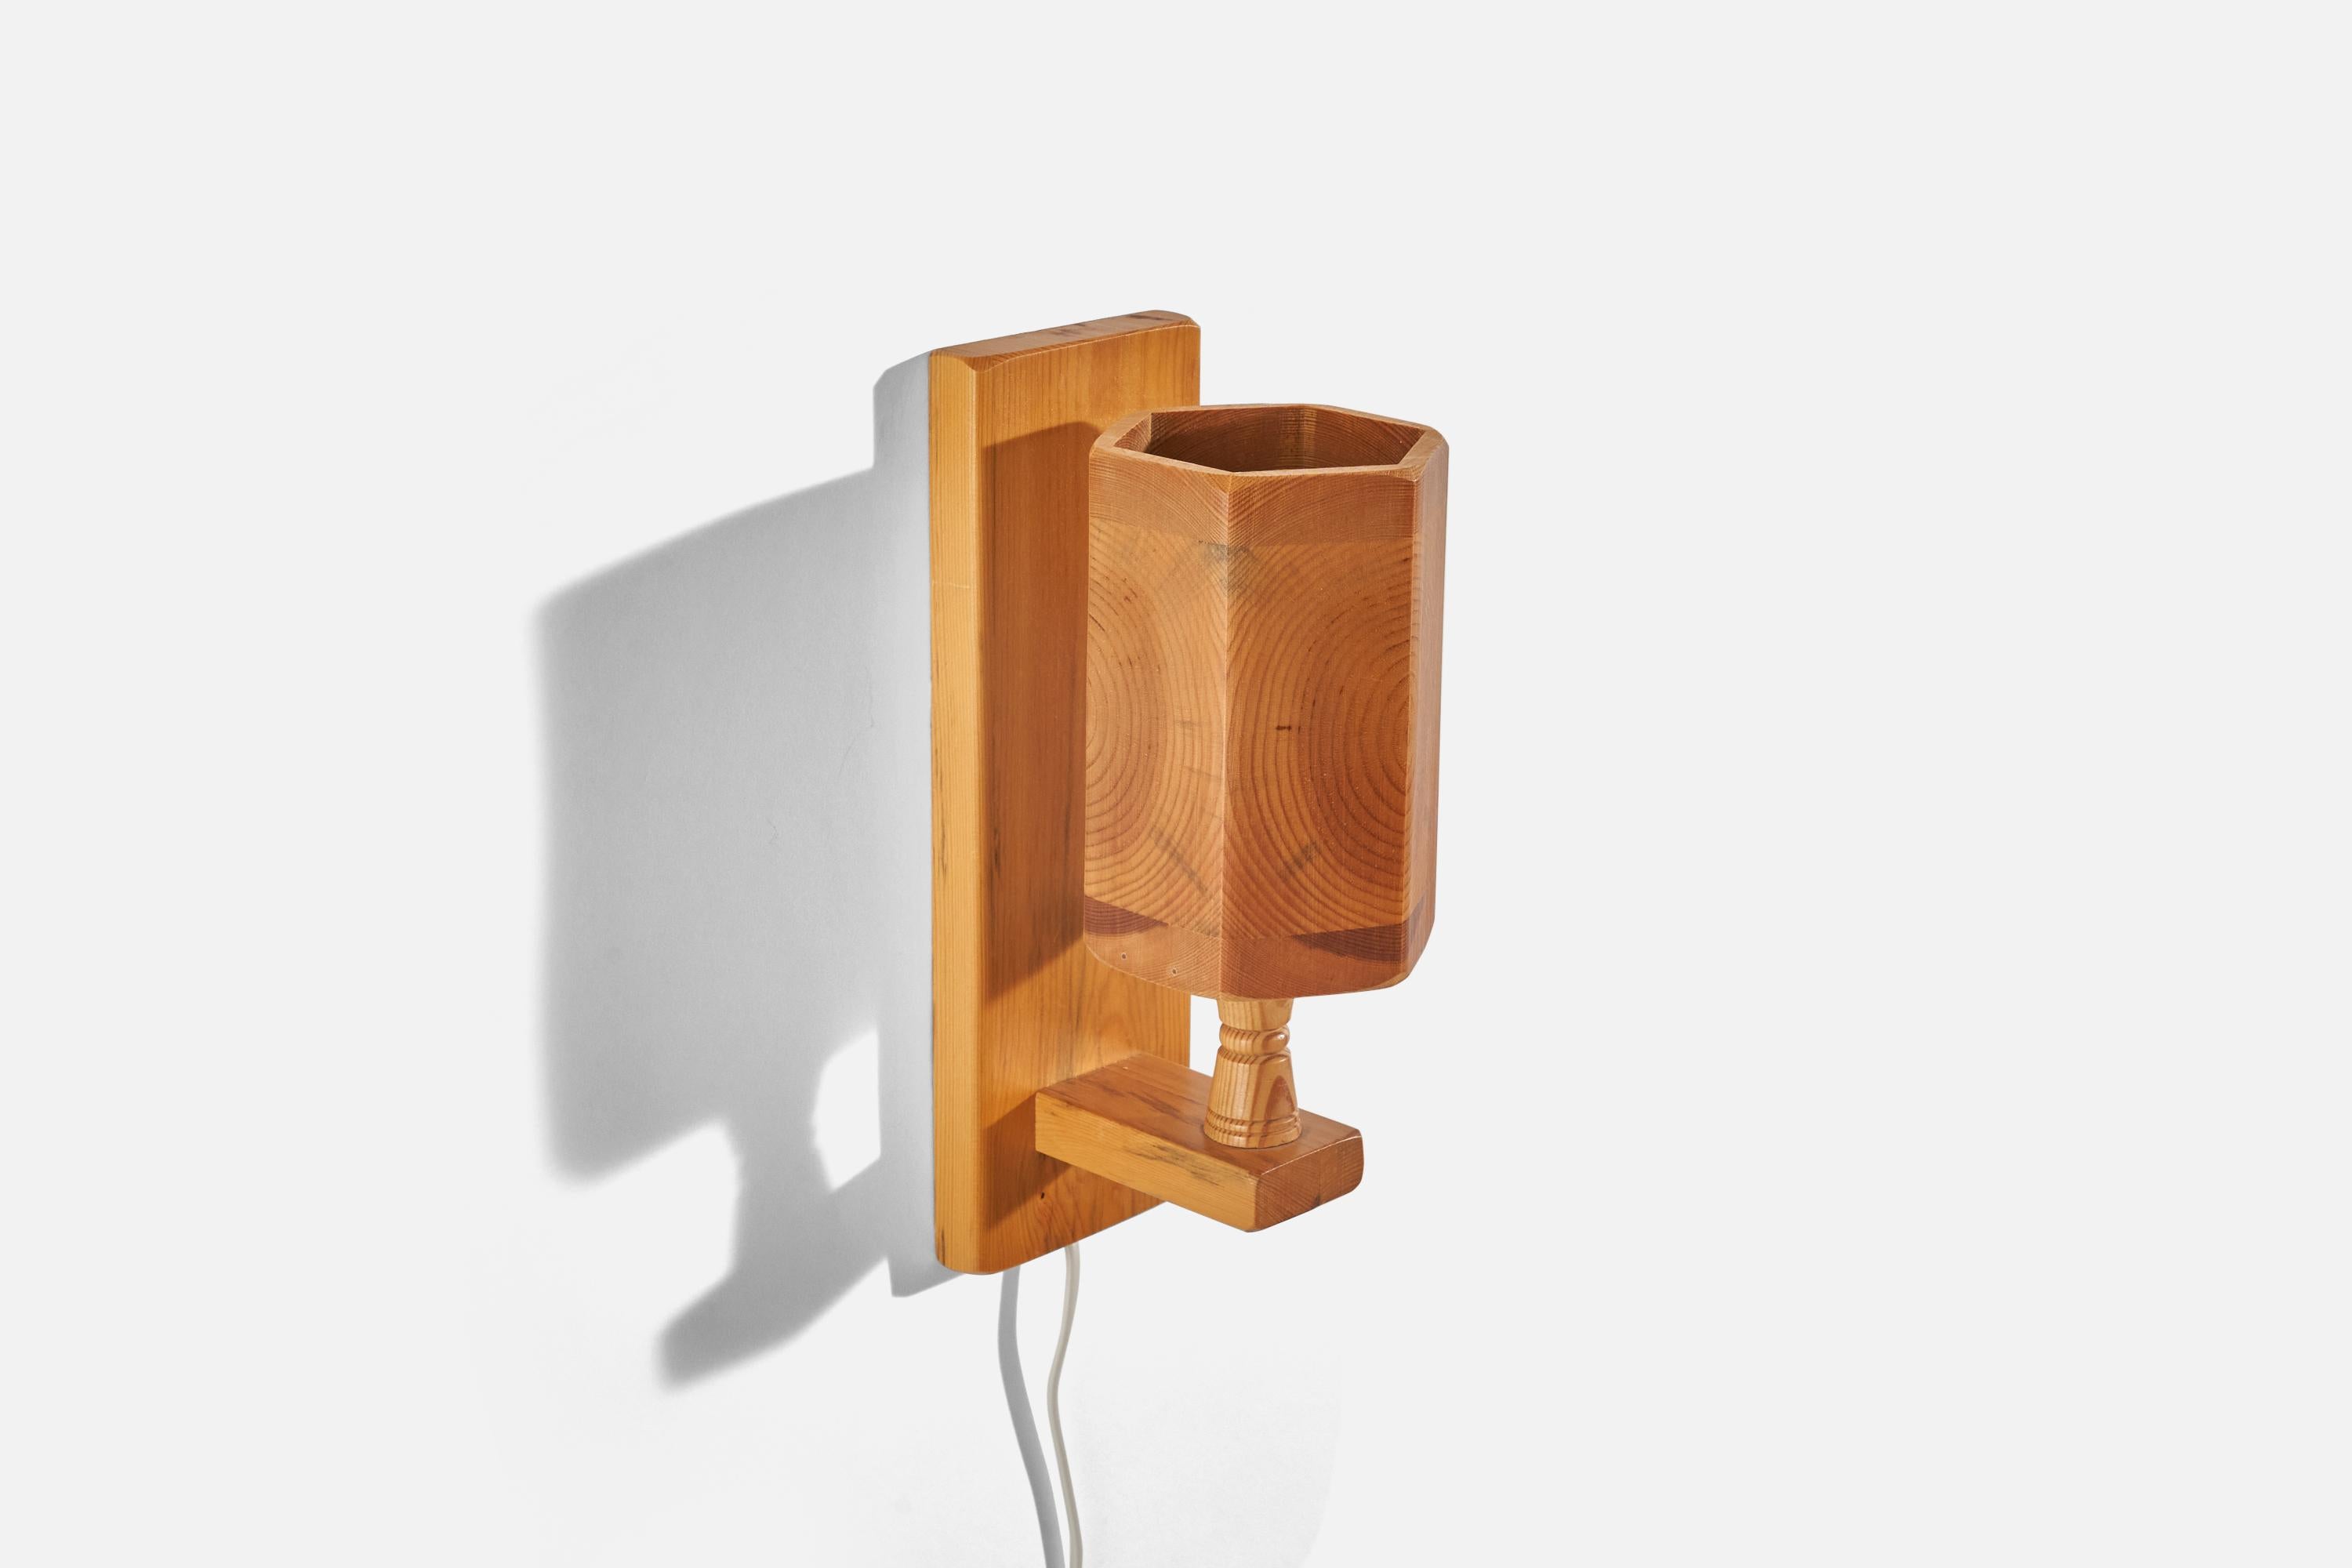 A pine wall light designed and produced in Sweden, 1970s.

Dimensions of Back Plate (inches) : 11.25 x 3.75 x 0.80 (Height x Width x Depth).

Socket takes E-14 bulb.

There is no maximum wattage stated on the fixture.